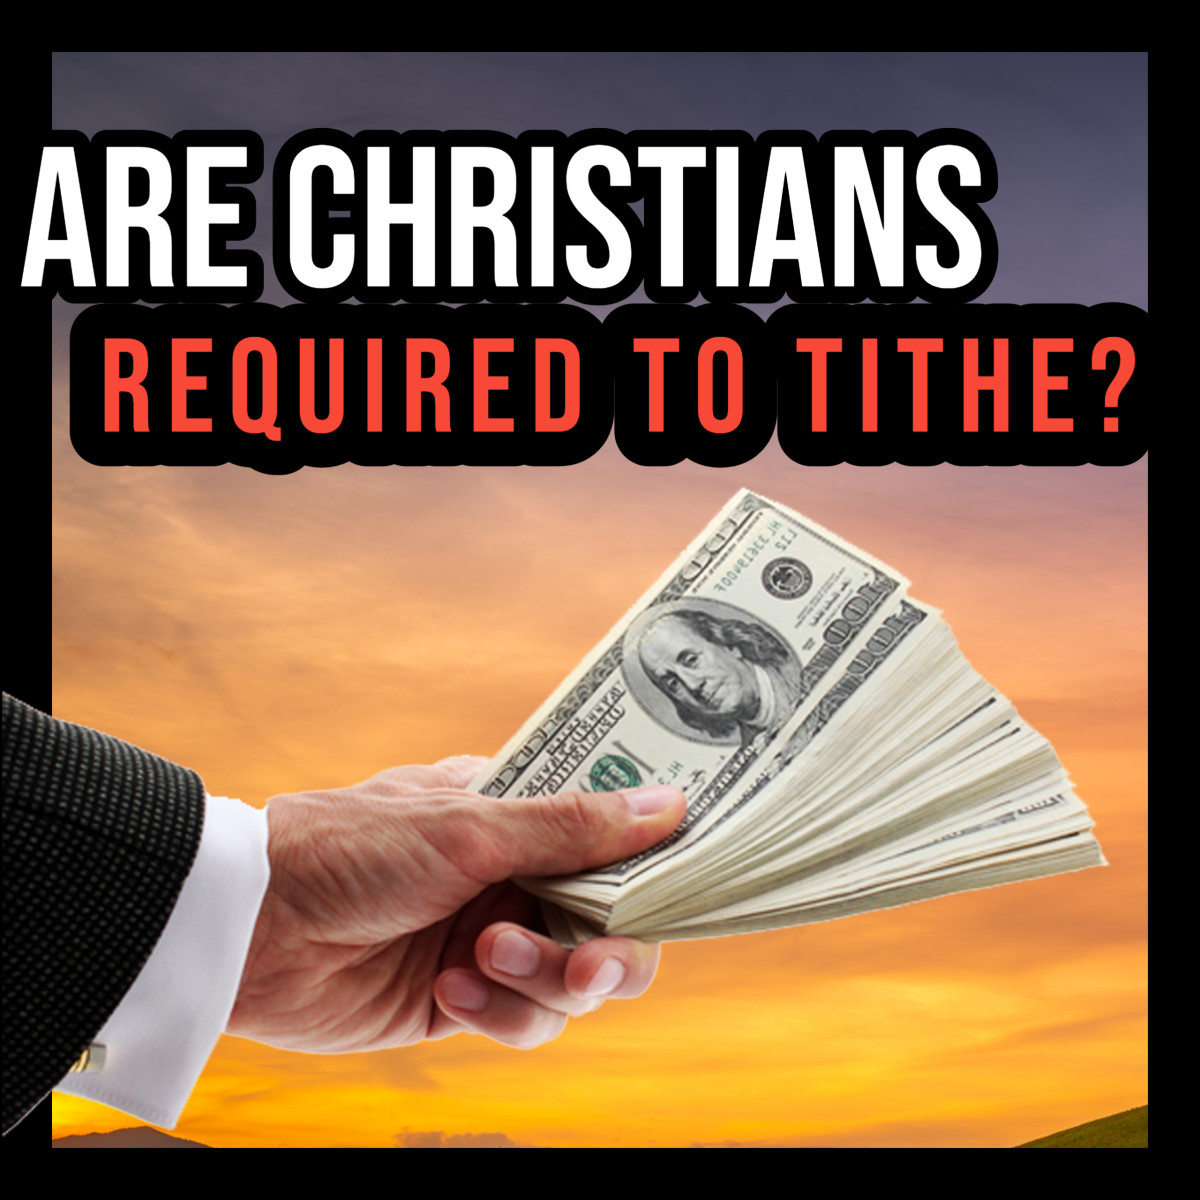 Are Christians Required to Tithe?